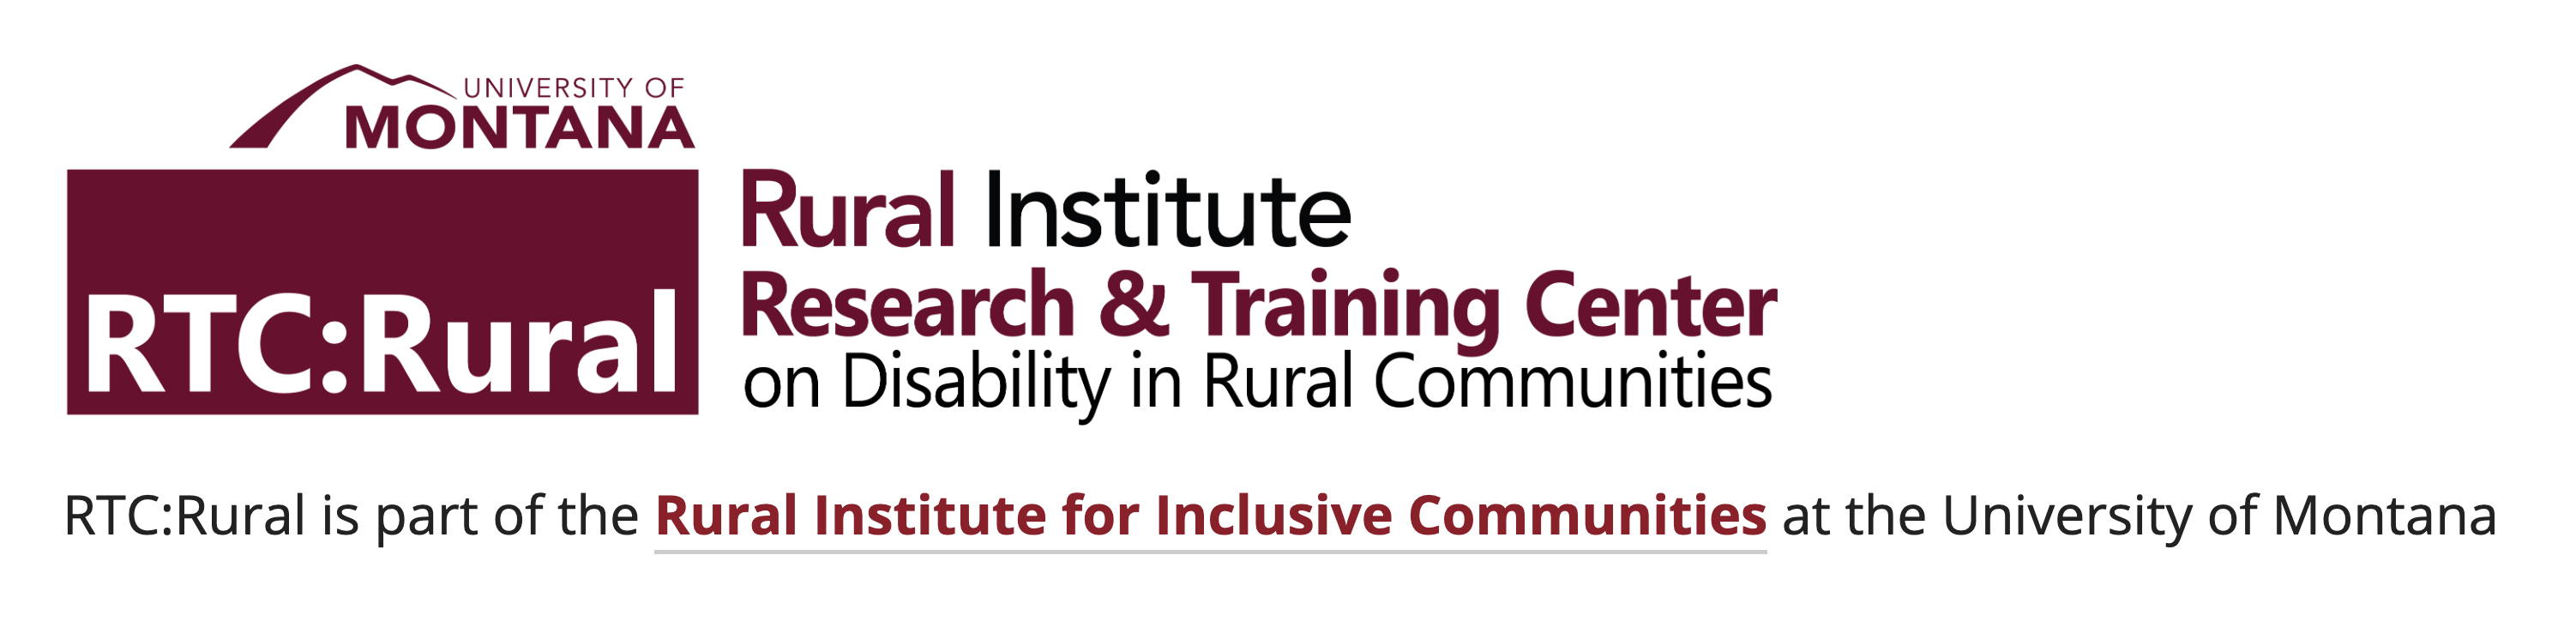 University of Montana RTC: Rural logo that says "Rural Institute. Research and Training Center on disability in rural communities. RTC rural is part of the rural institute for inclusive communities at the University of Montana".